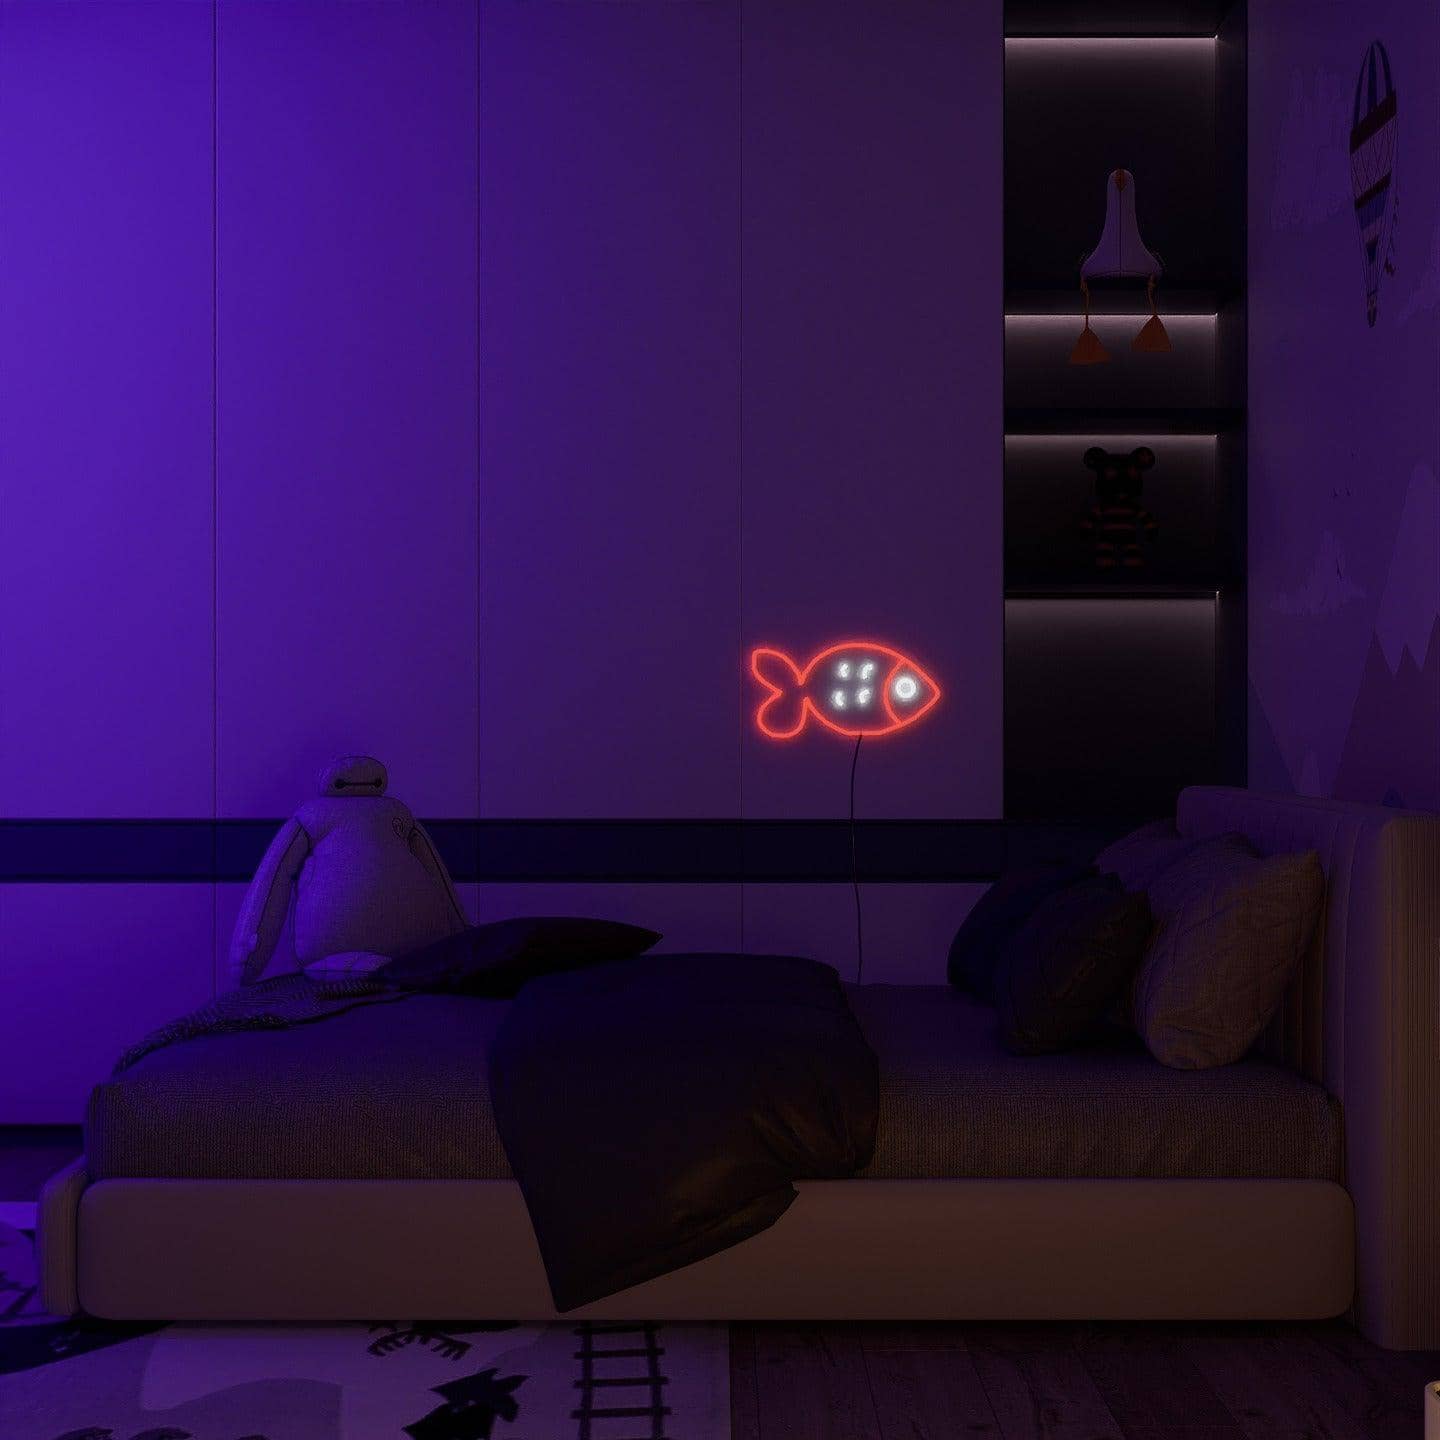 light-up-neon-lights-and-hang-them-in-your-bedroom-for-display-fishy-friend-red